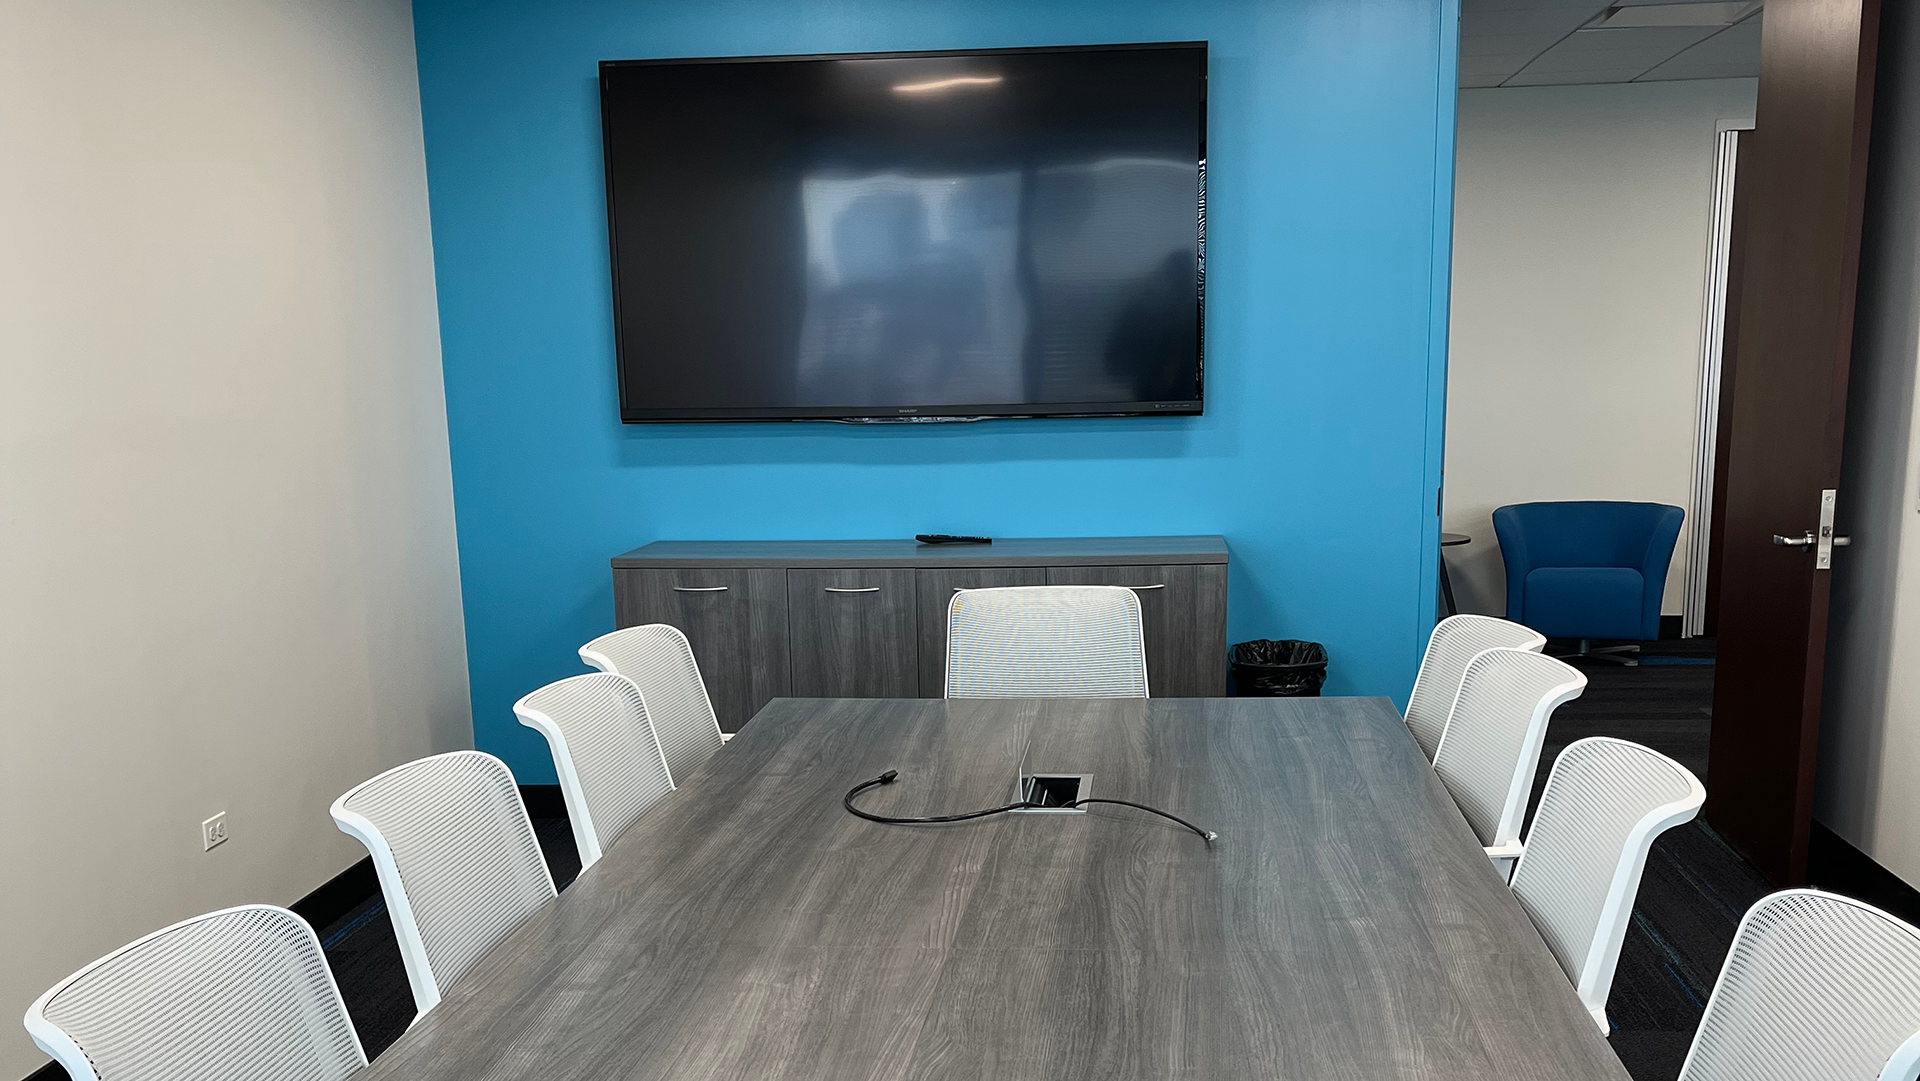 1450 American Lane - Conference room with TV